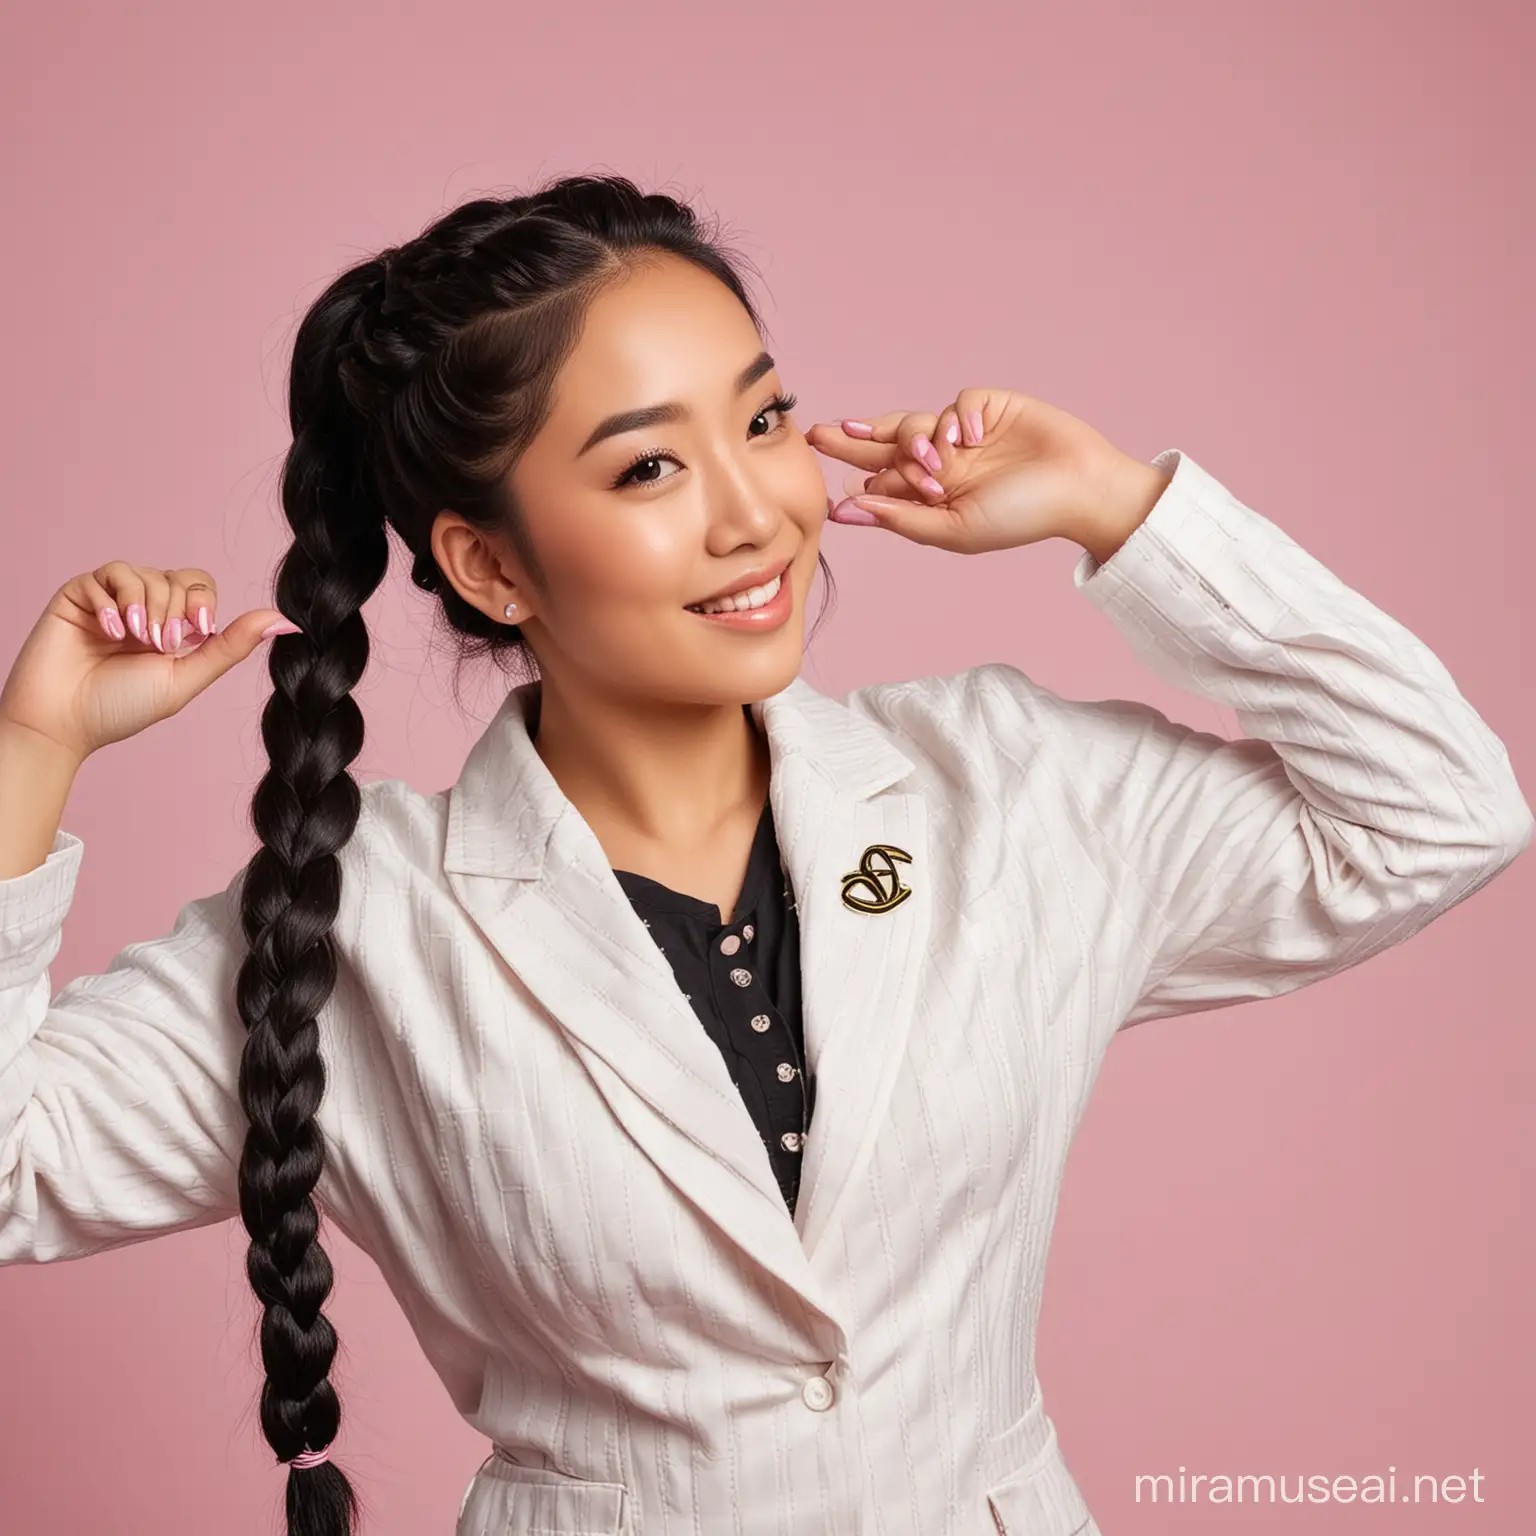 Stylish Asian Woman in Chic White Suit Gesturing Peace Sign